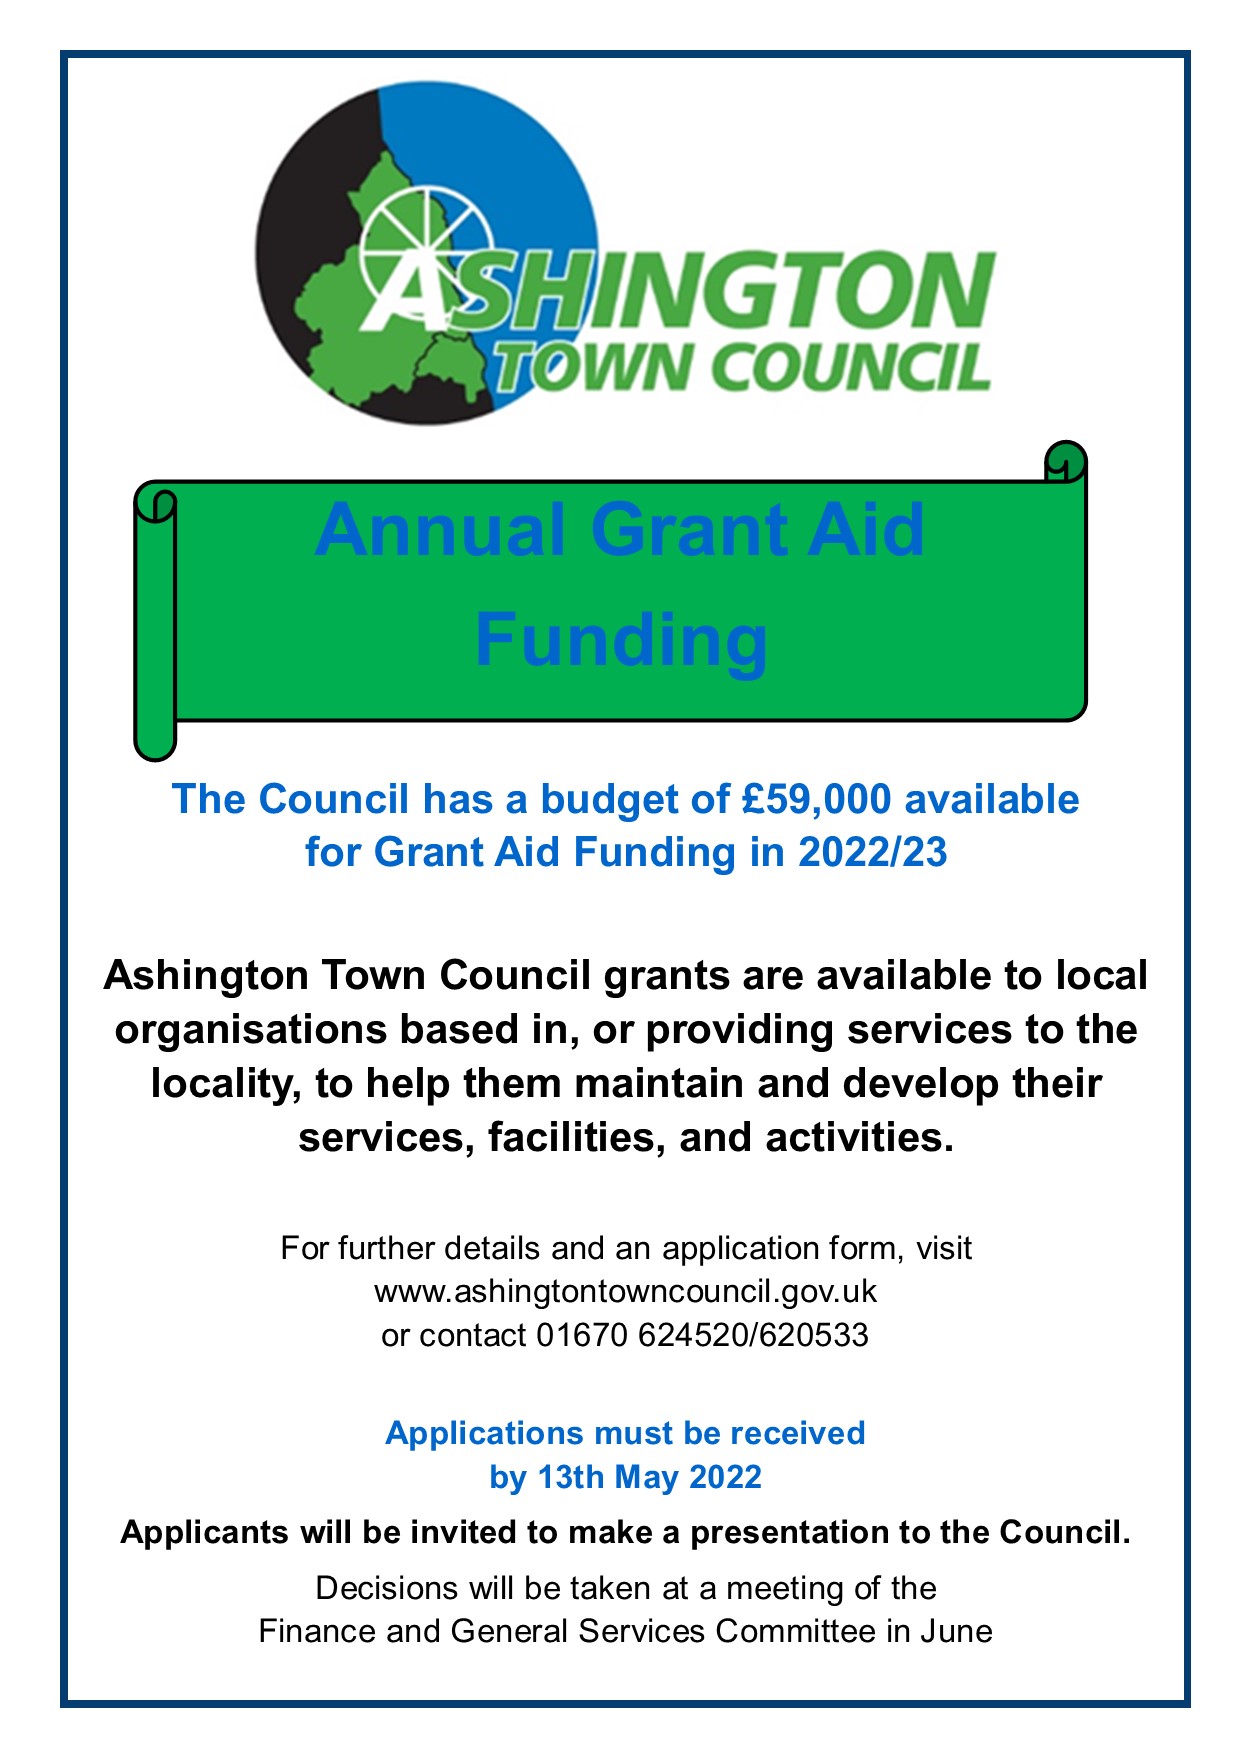 Applications for Annual Grant Aid Funding are invited